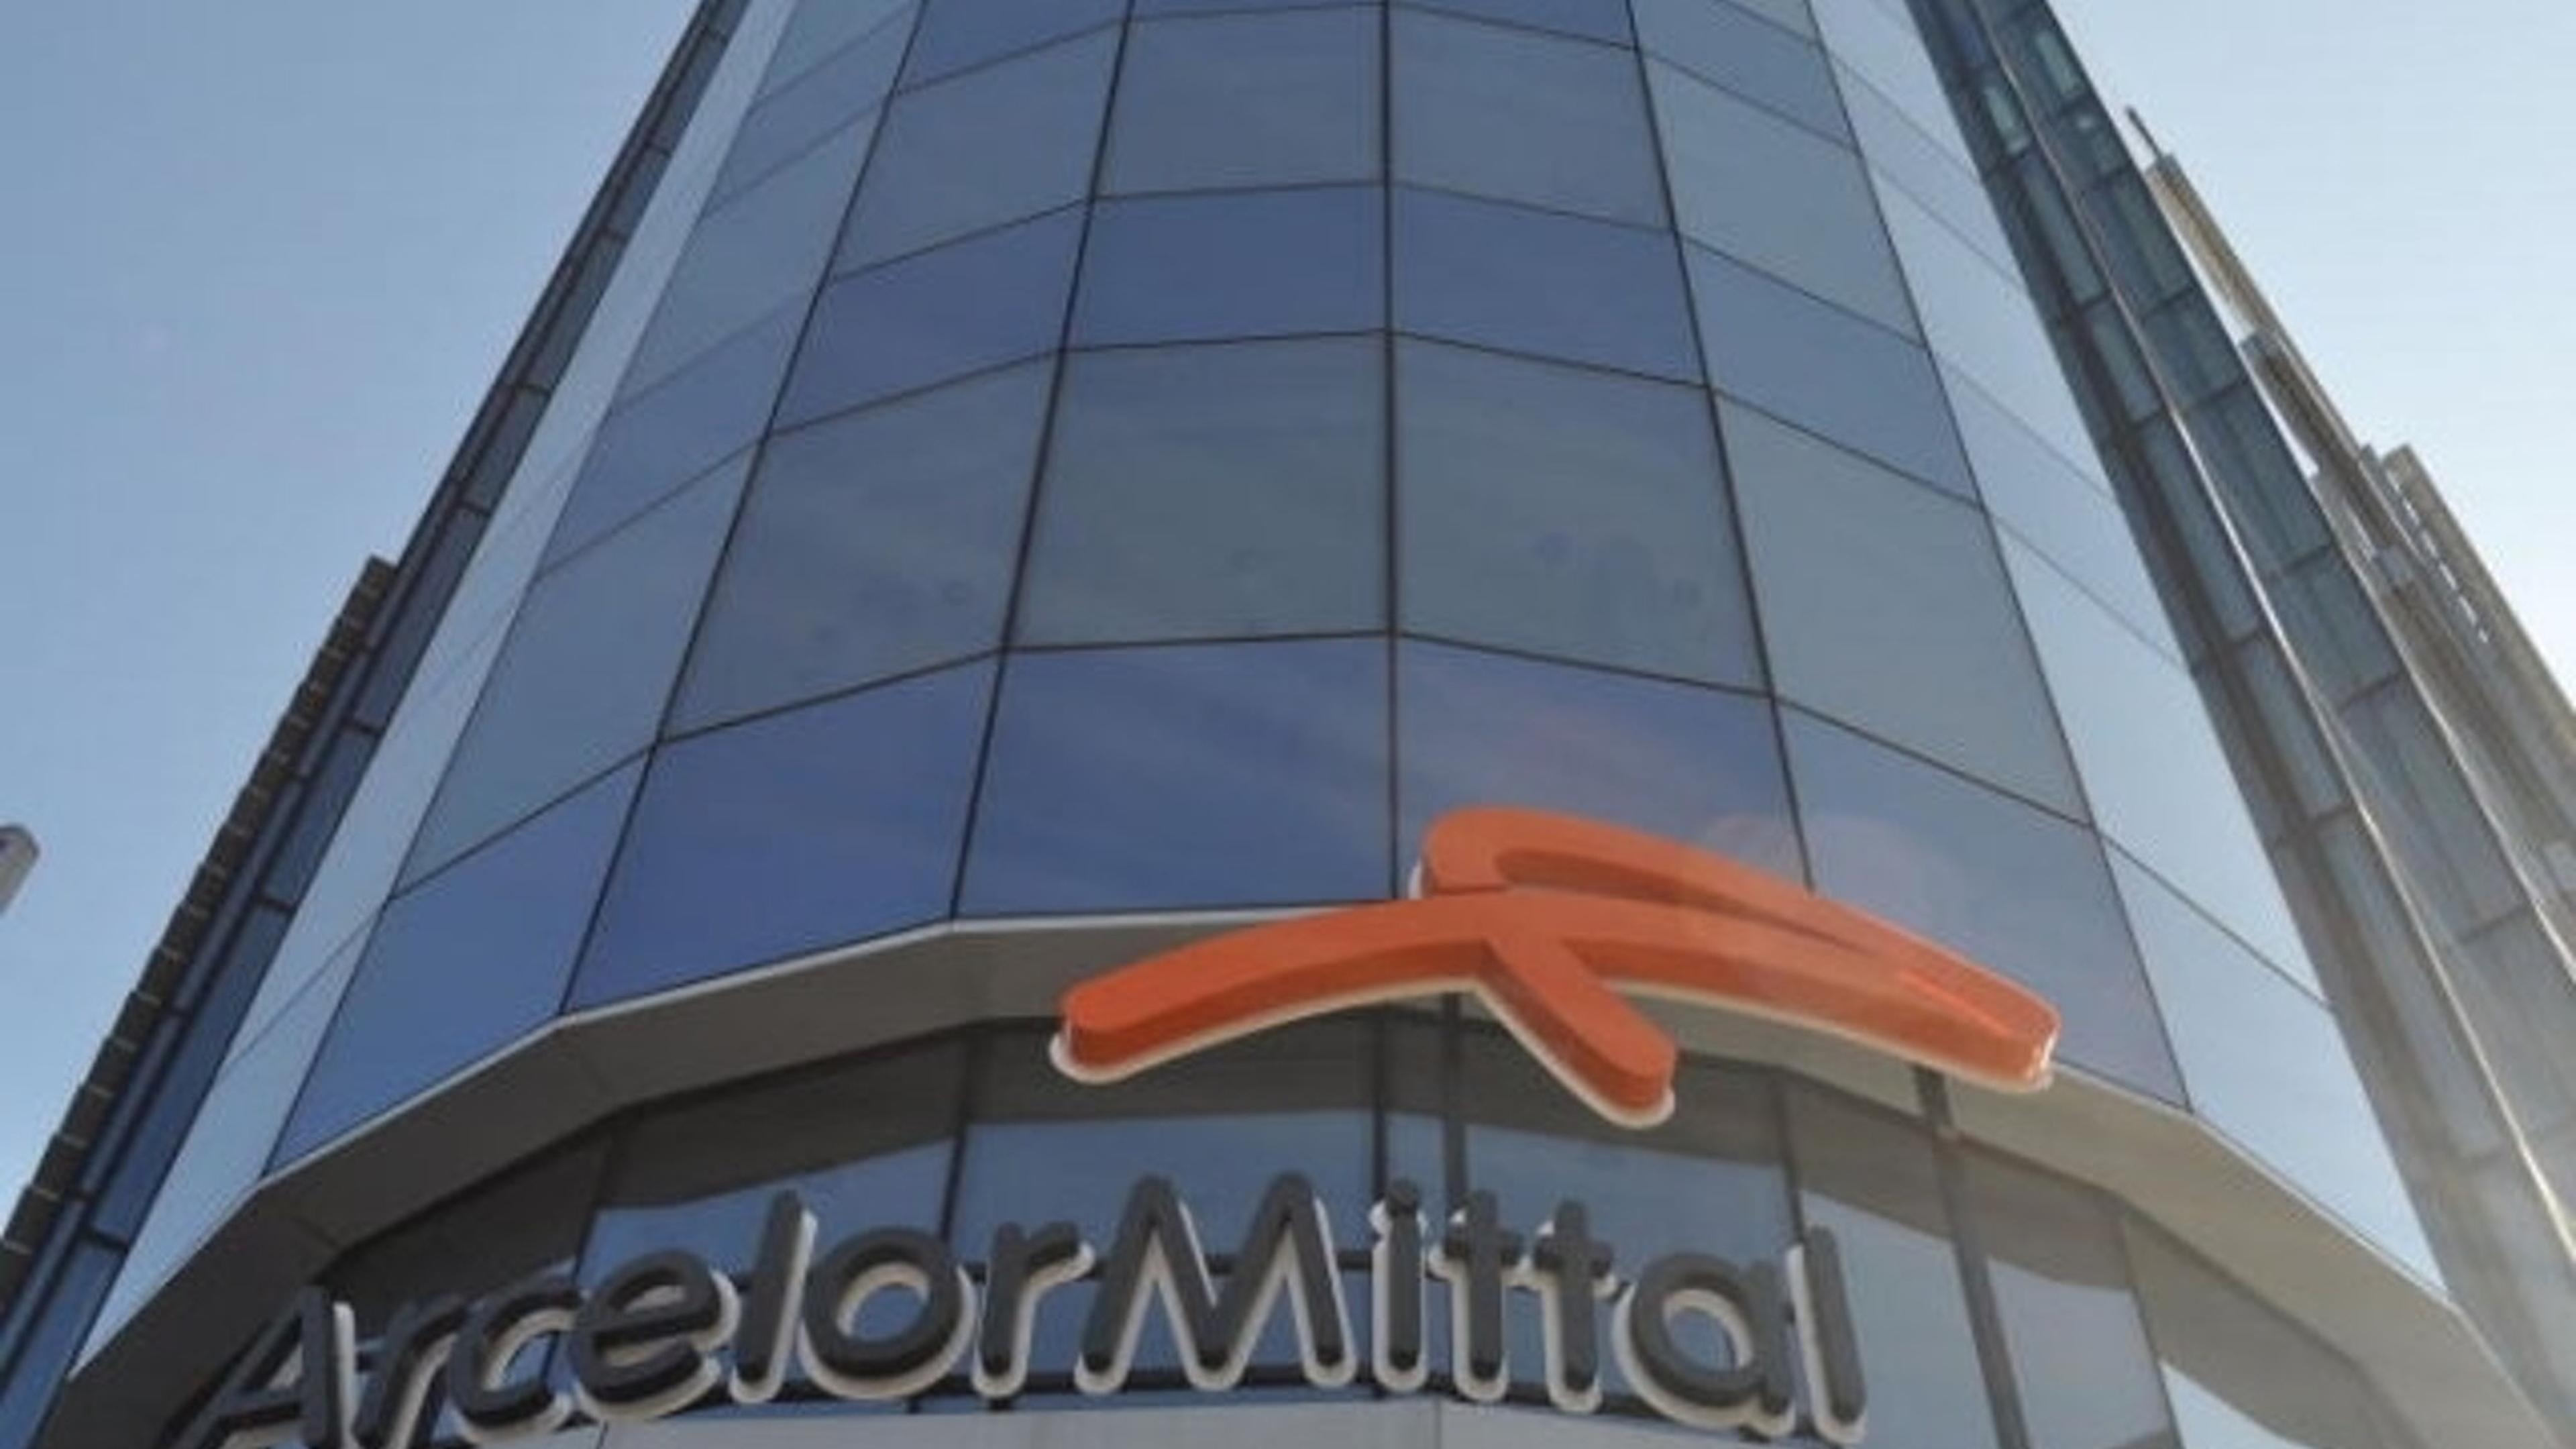 ArcelorMittal headquarters in Luxembourg (LW archive)